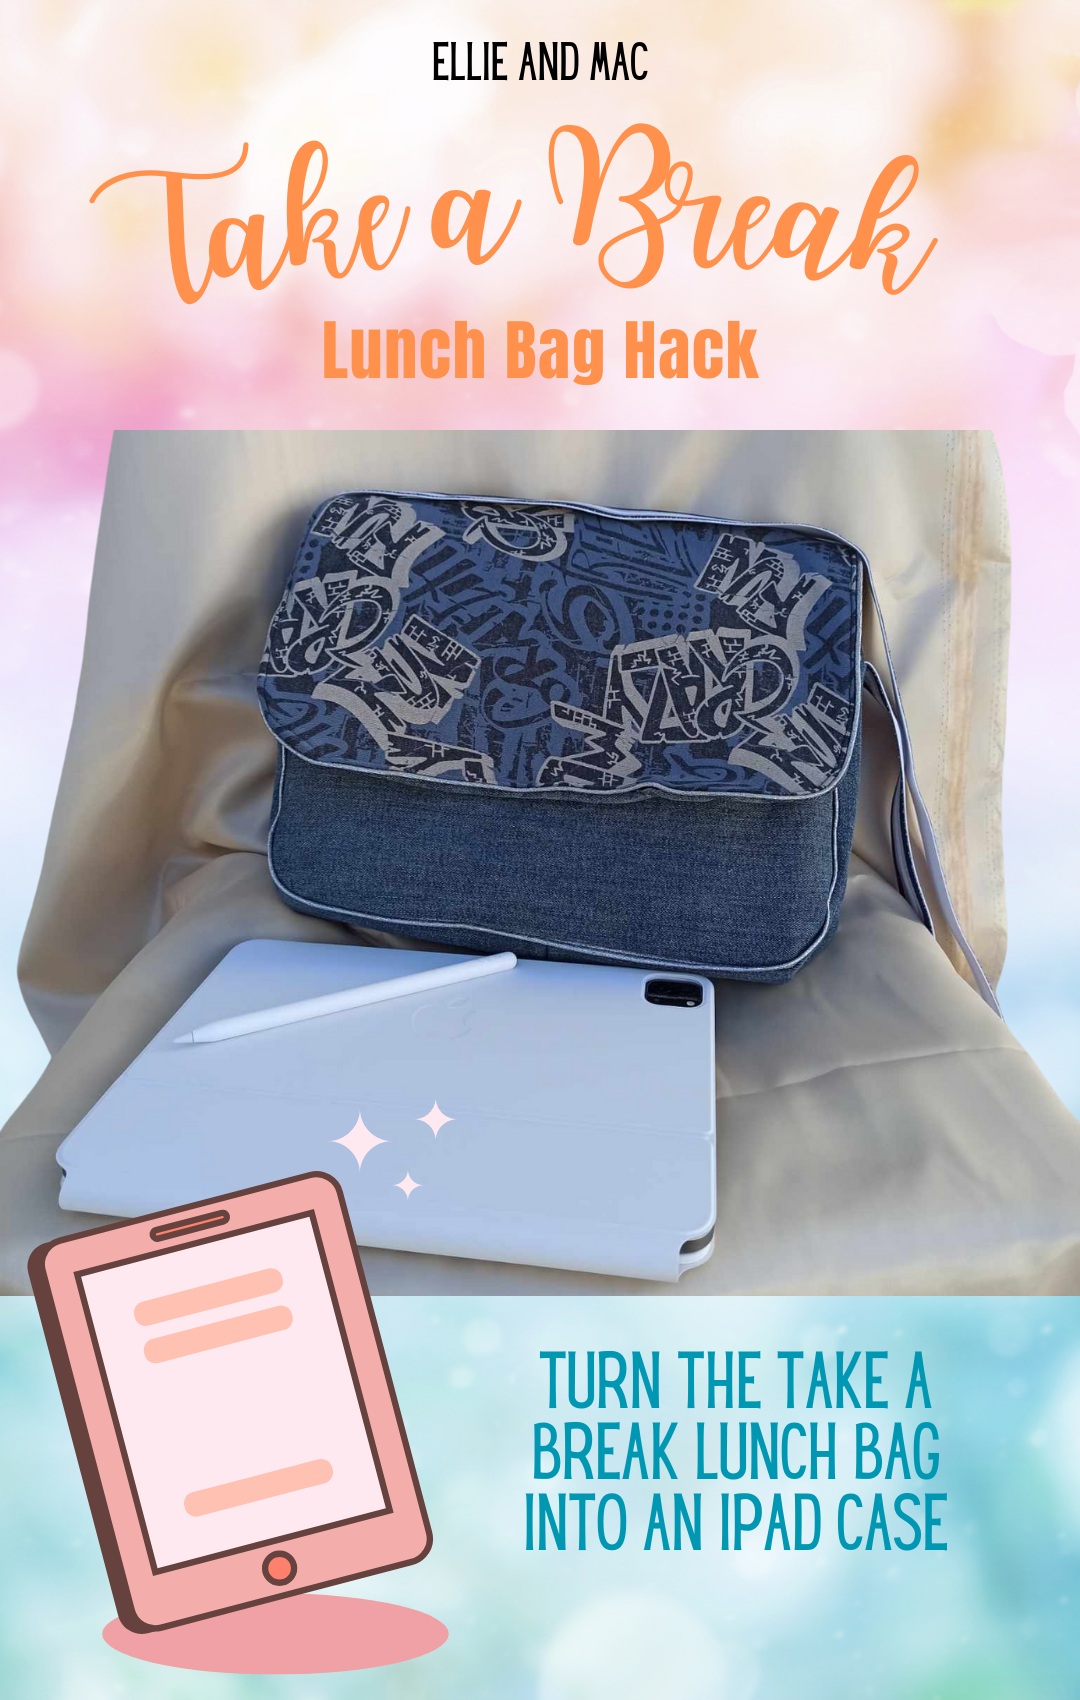 Turn the Take a Break Lunch Bag Into An iPad Case